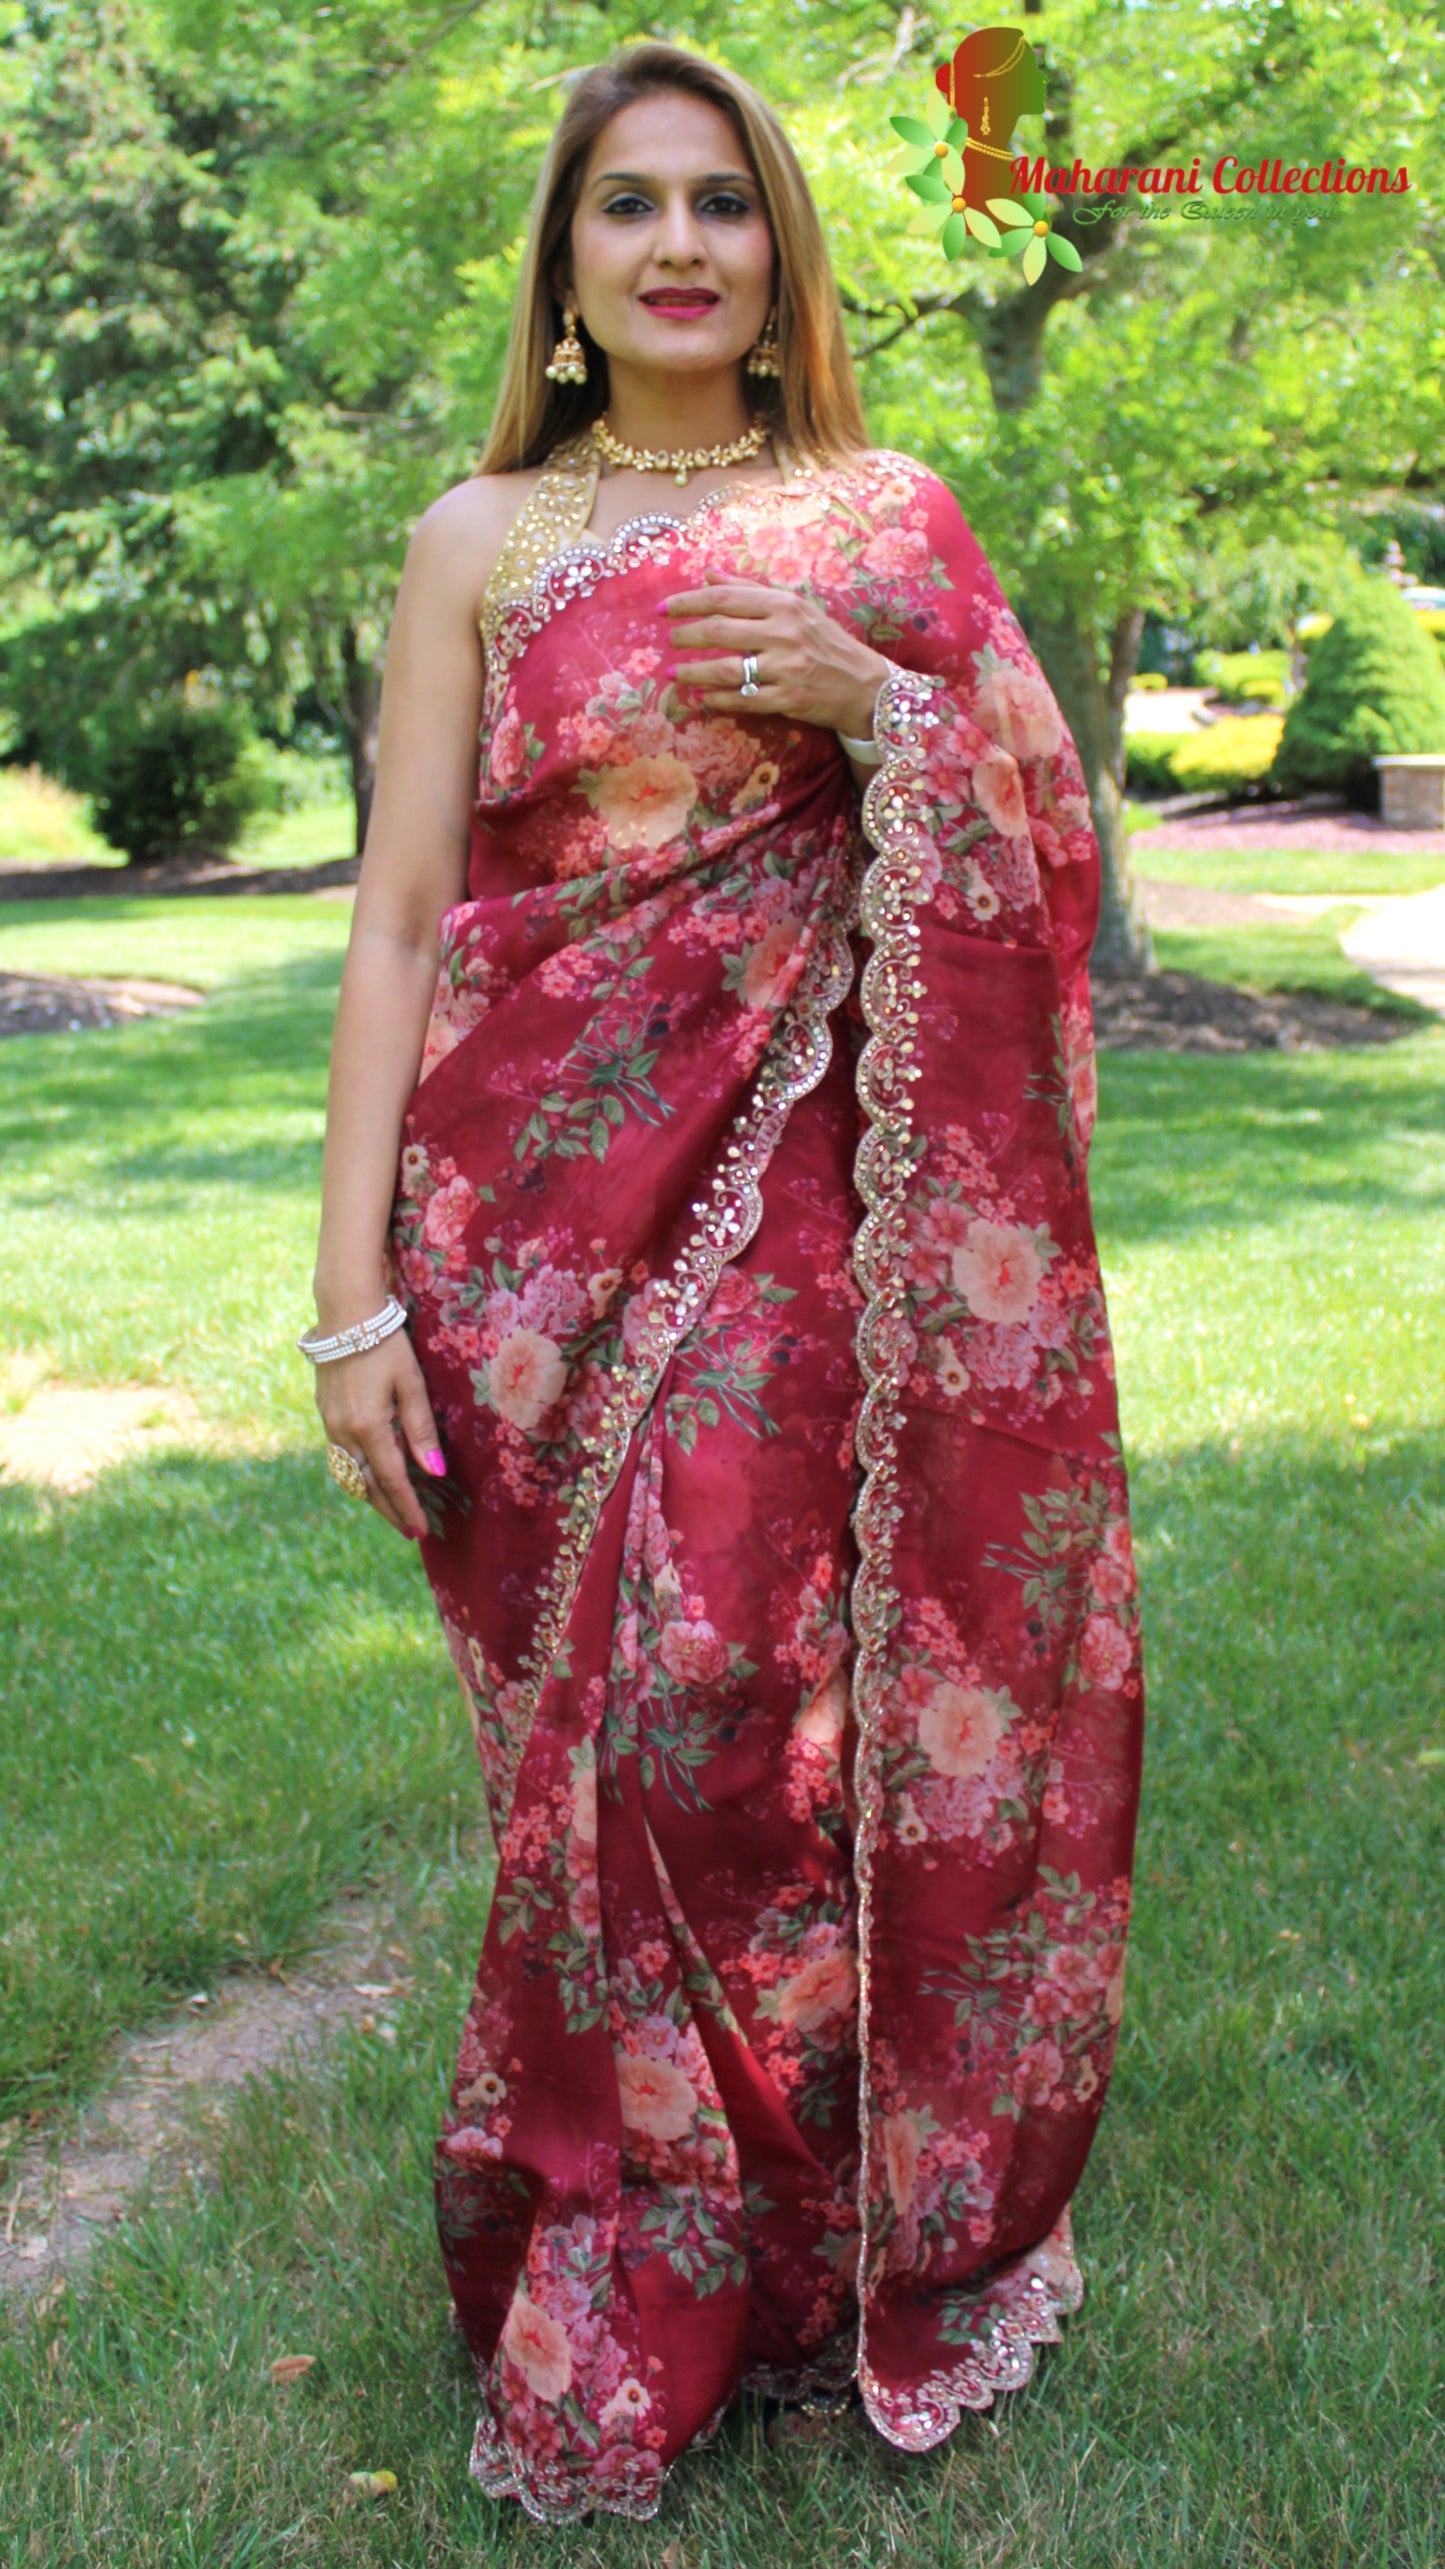 Maharani's Party Wear Organza Silk Saree - Maroon Floral (with stitched Petticoat)